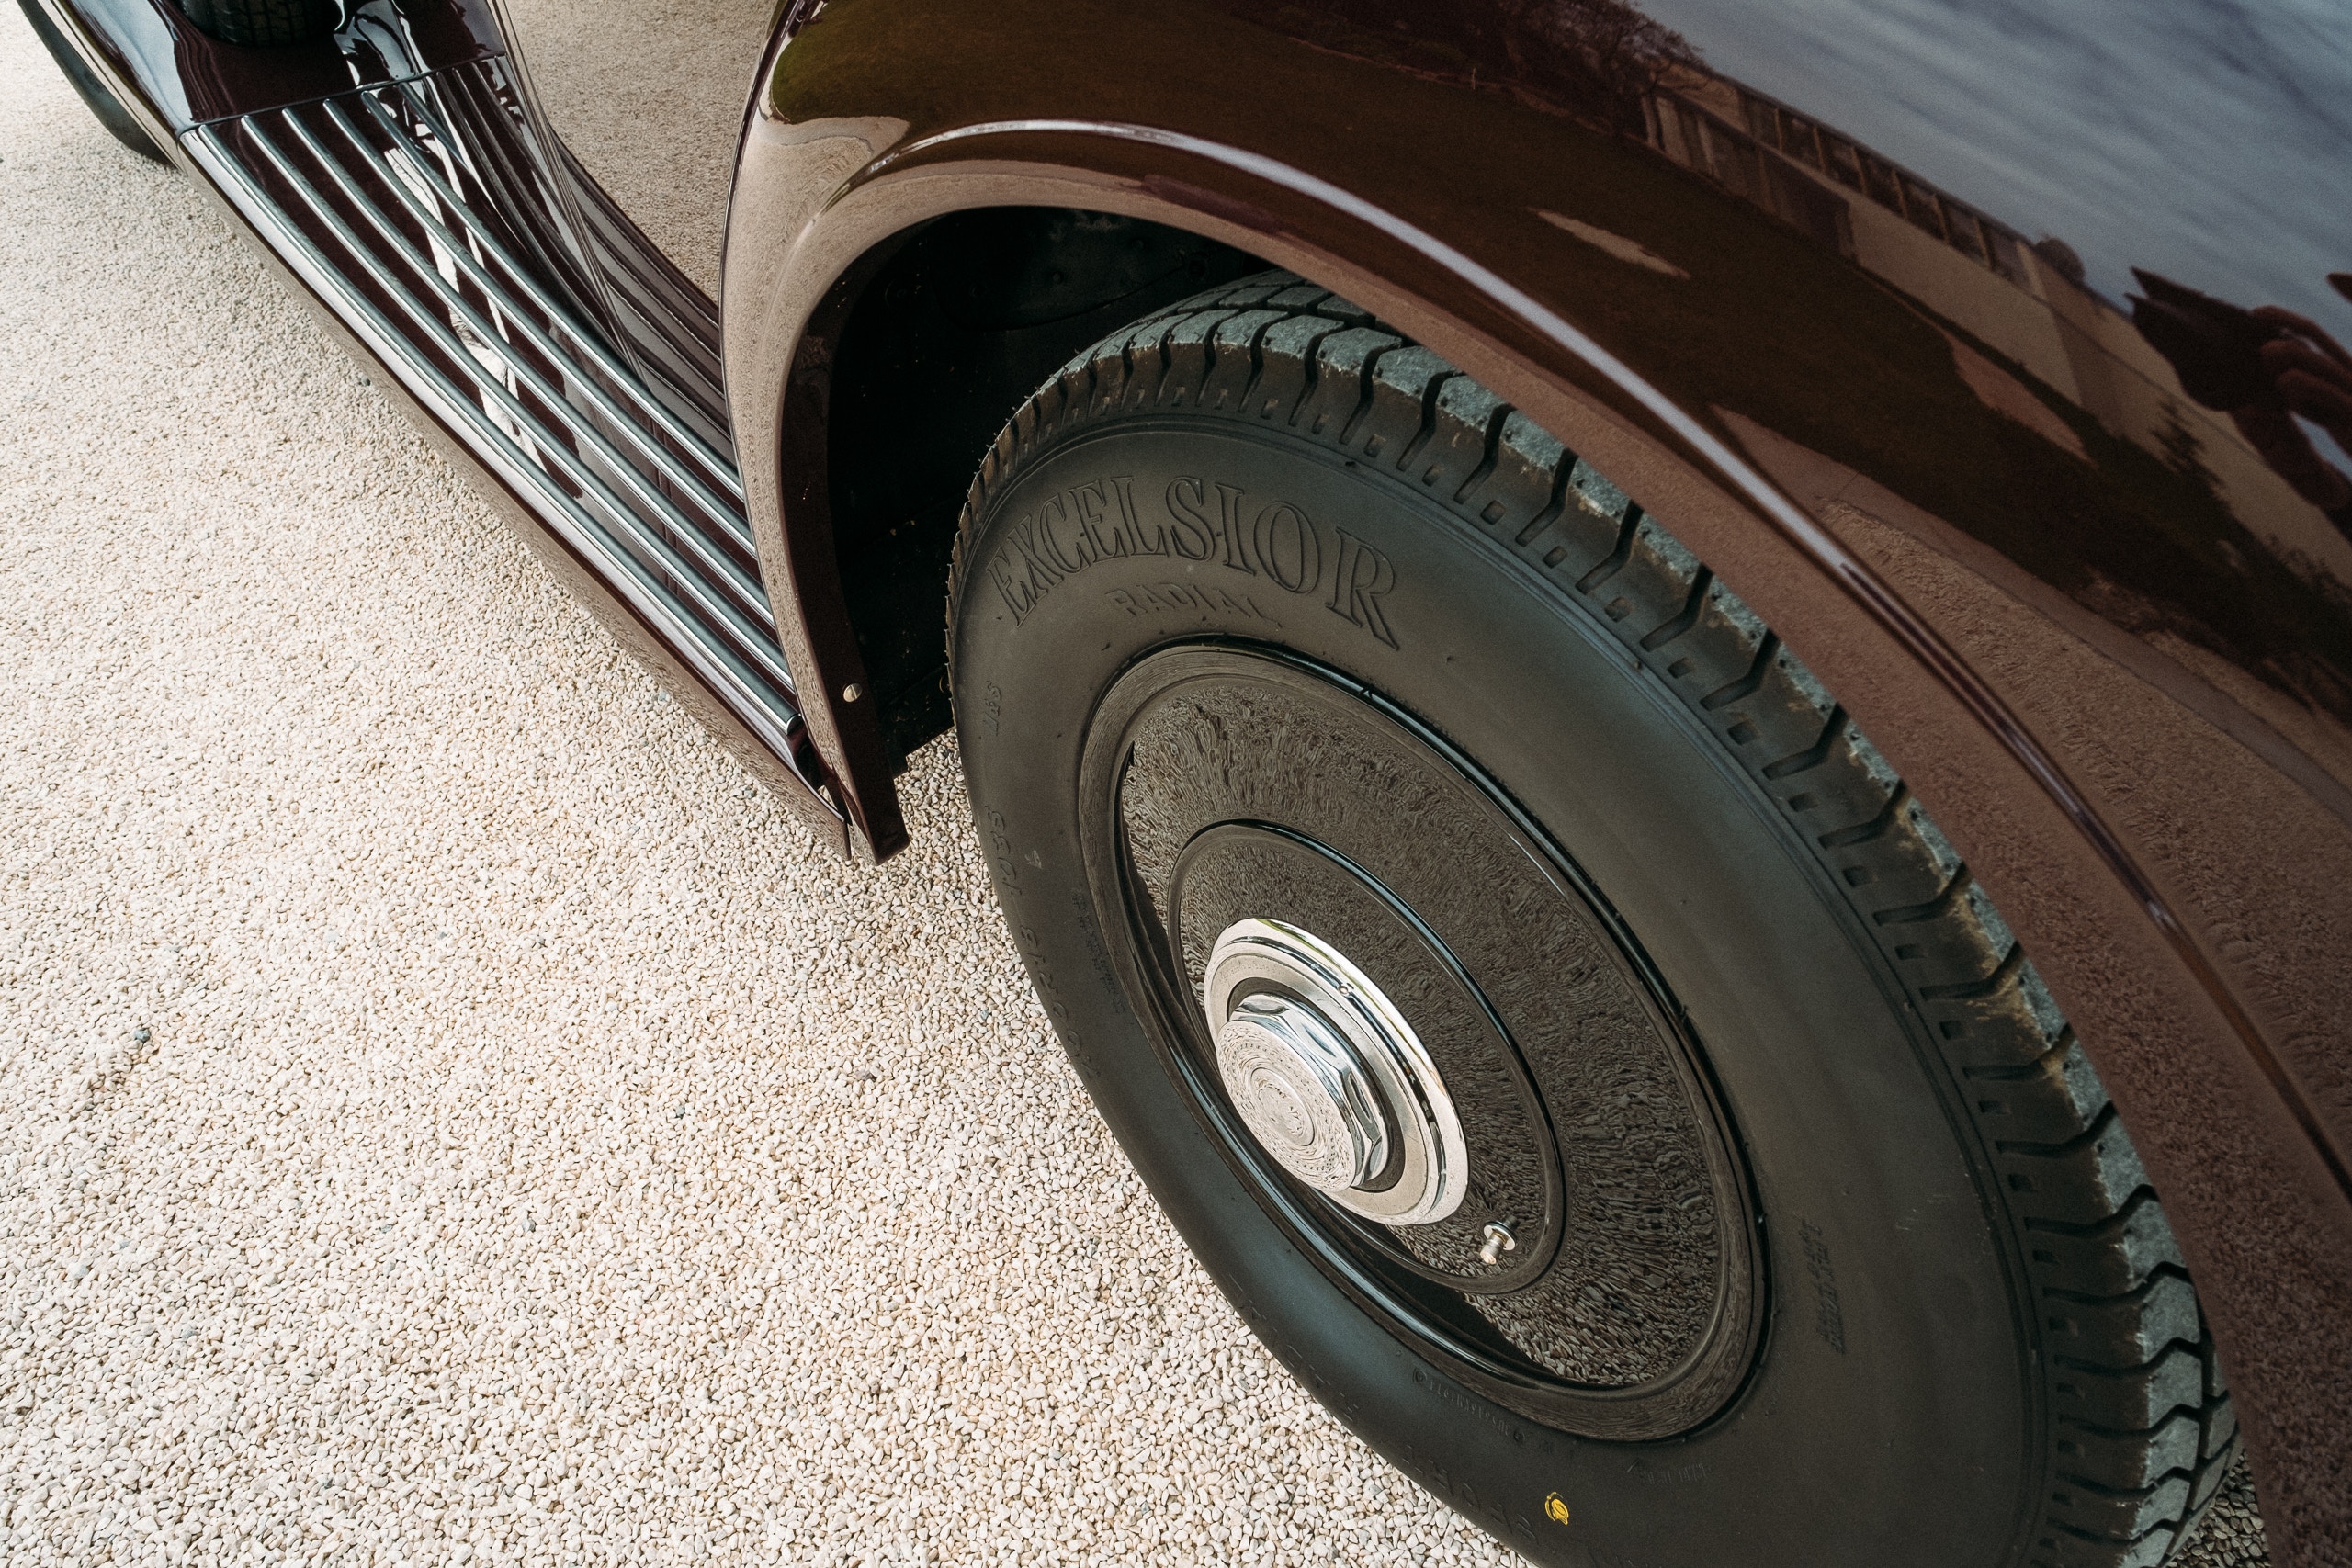 Why You Should Know How to Change a Tire